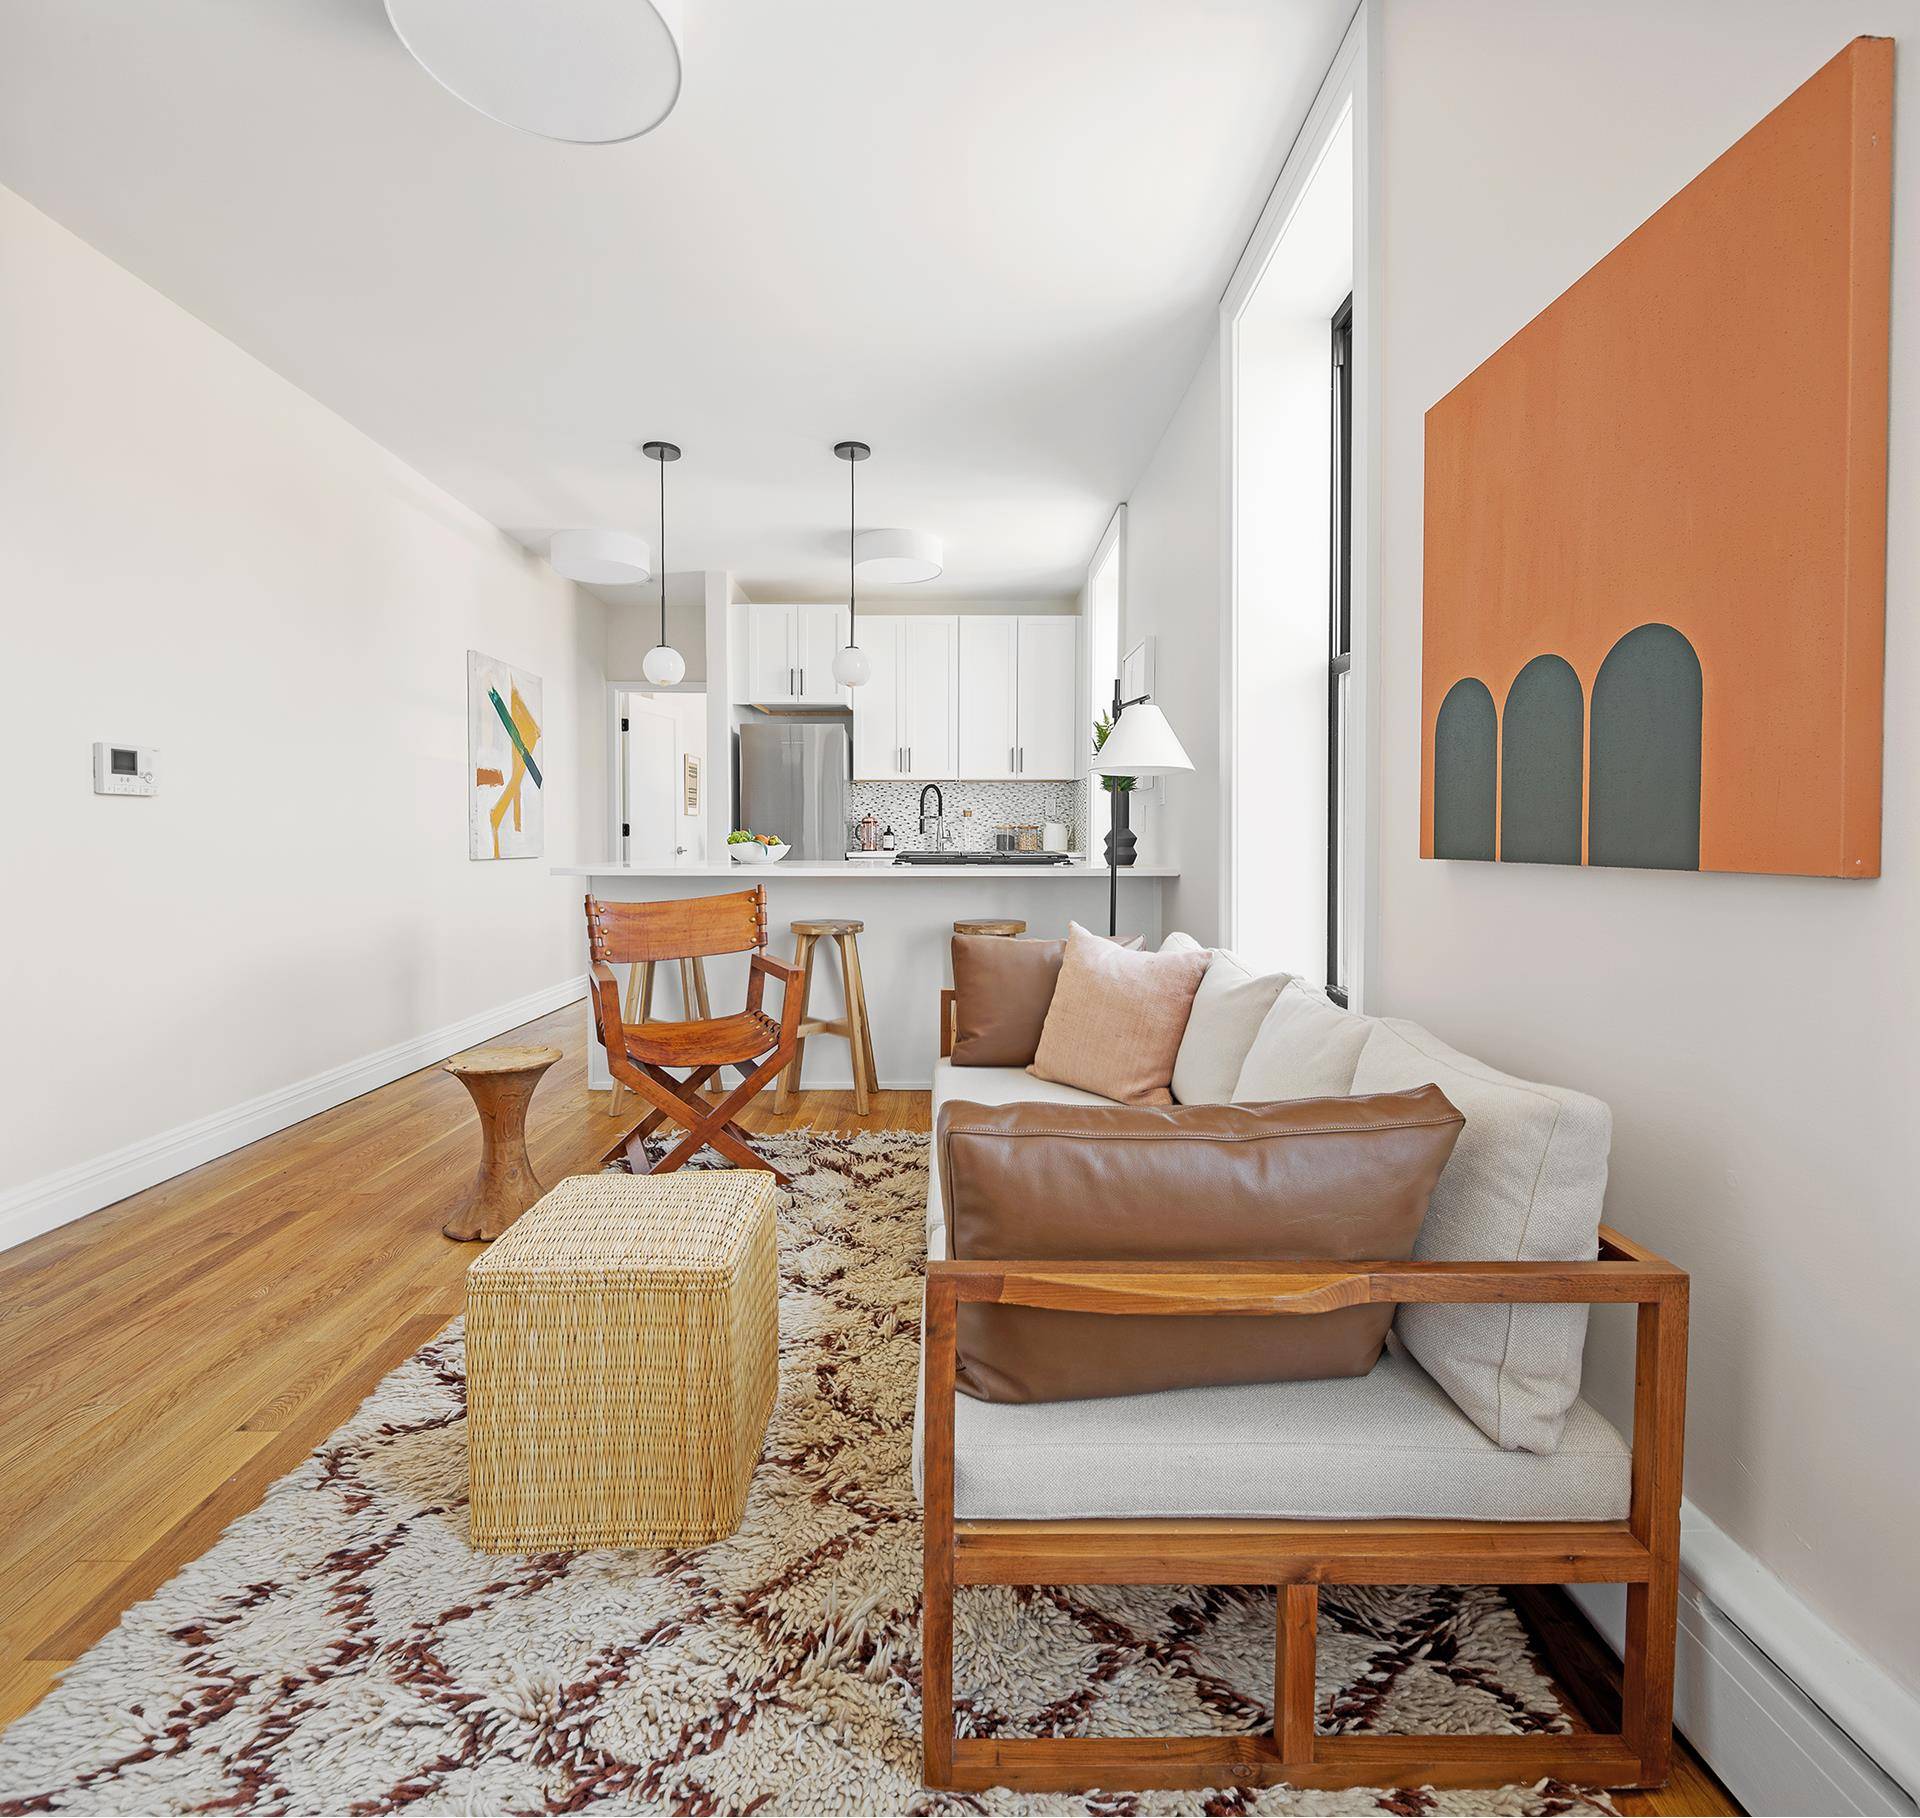 Located just three blocks from Prospect Park and in one of the city's most diverse and amenity rich neighborhoods, The 764 Saint John's Place Condominium introduces 12 reimagined, converted condominium ...